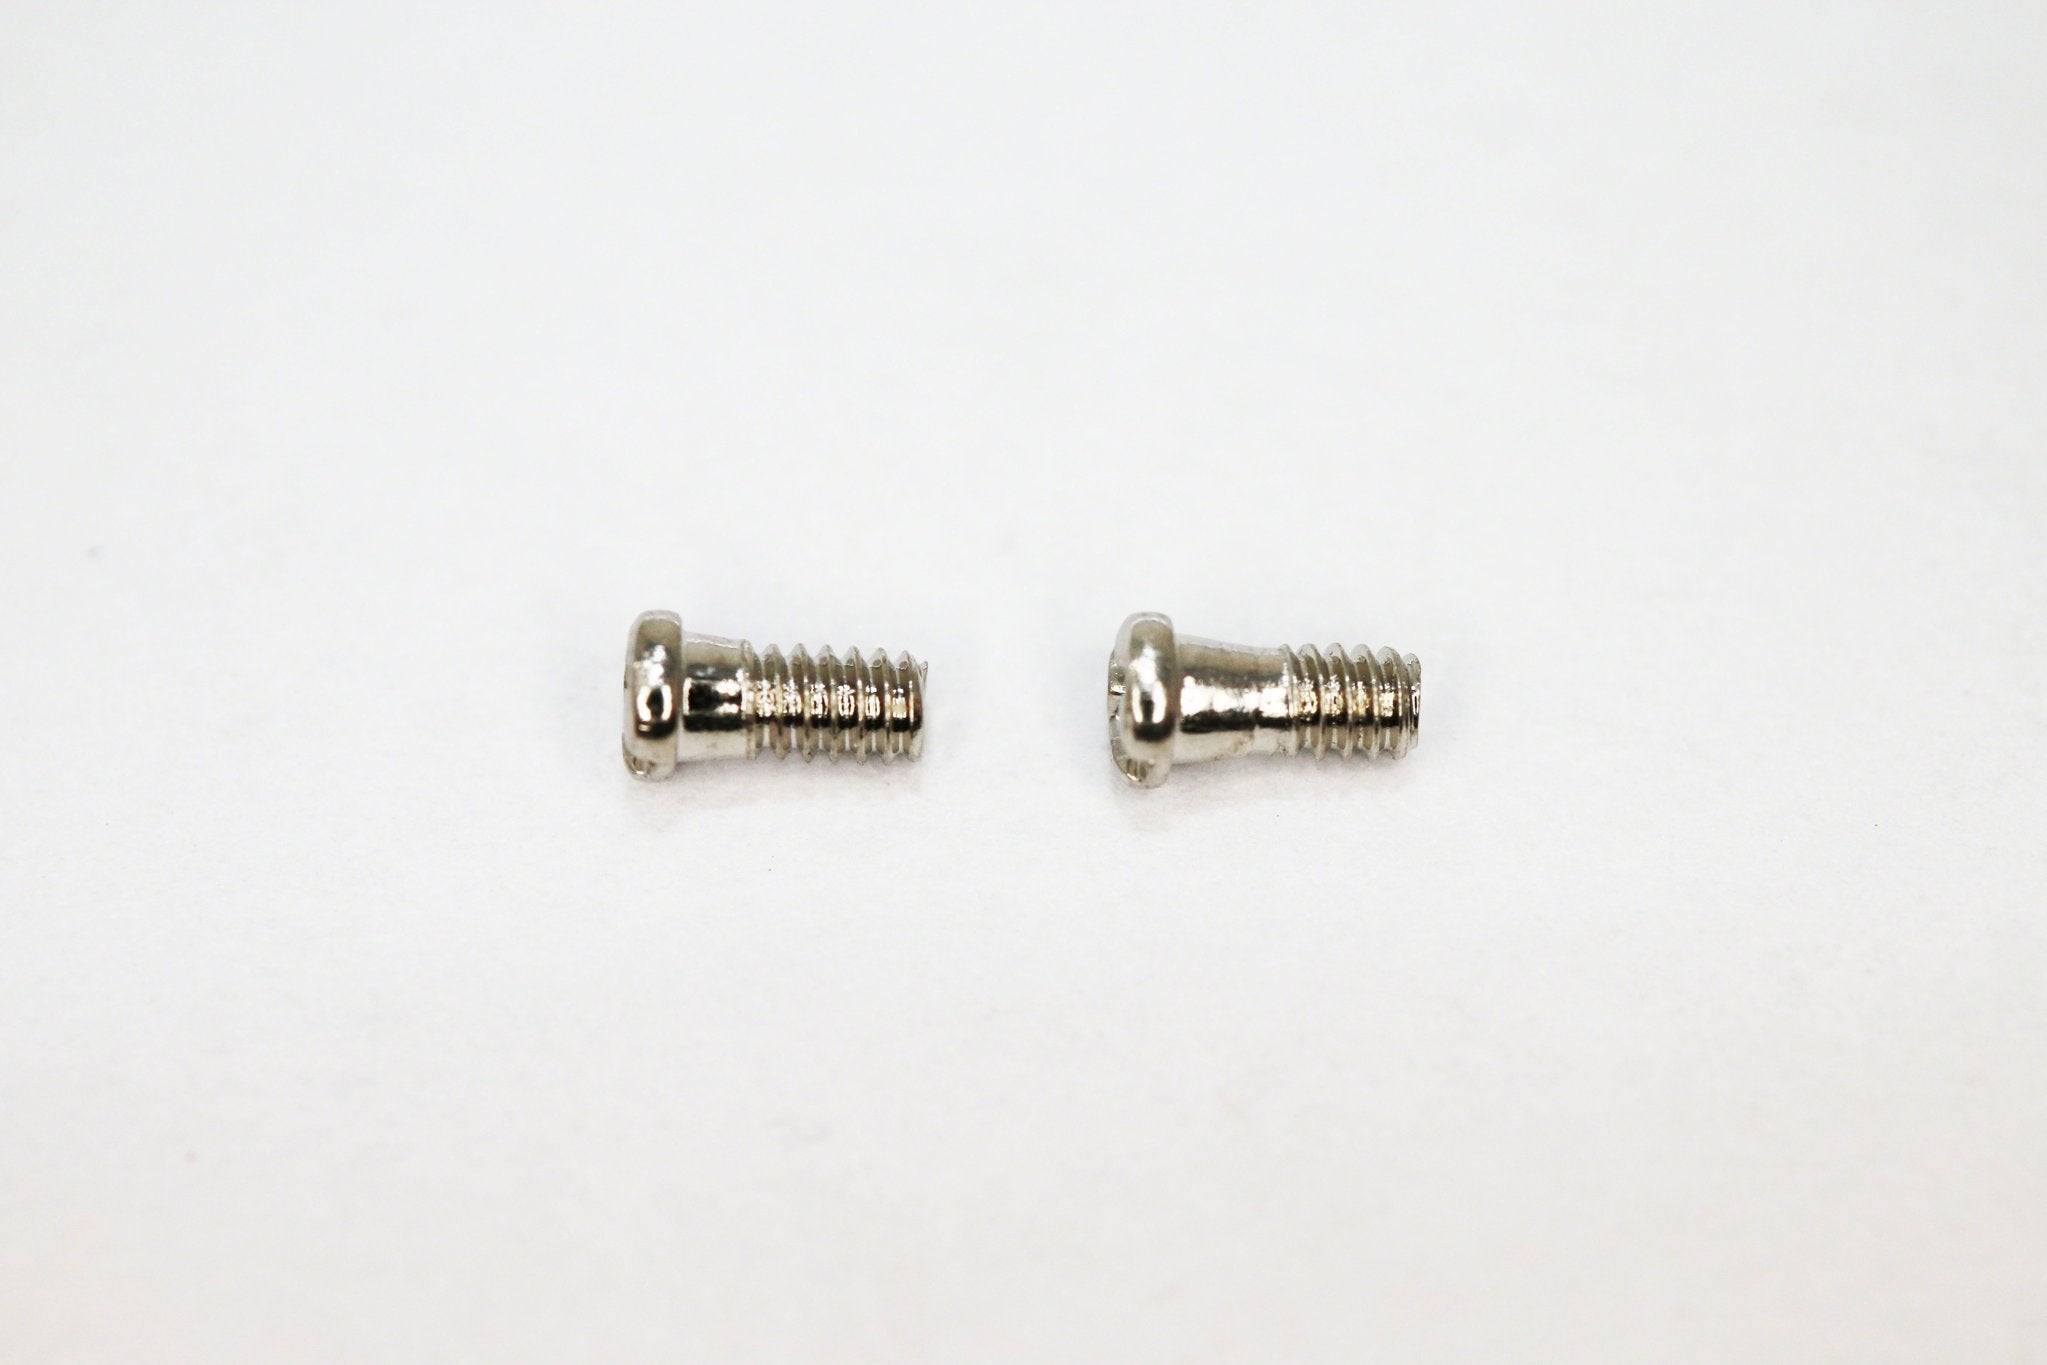 Chanel Screws - Replacement Chanel Screws 